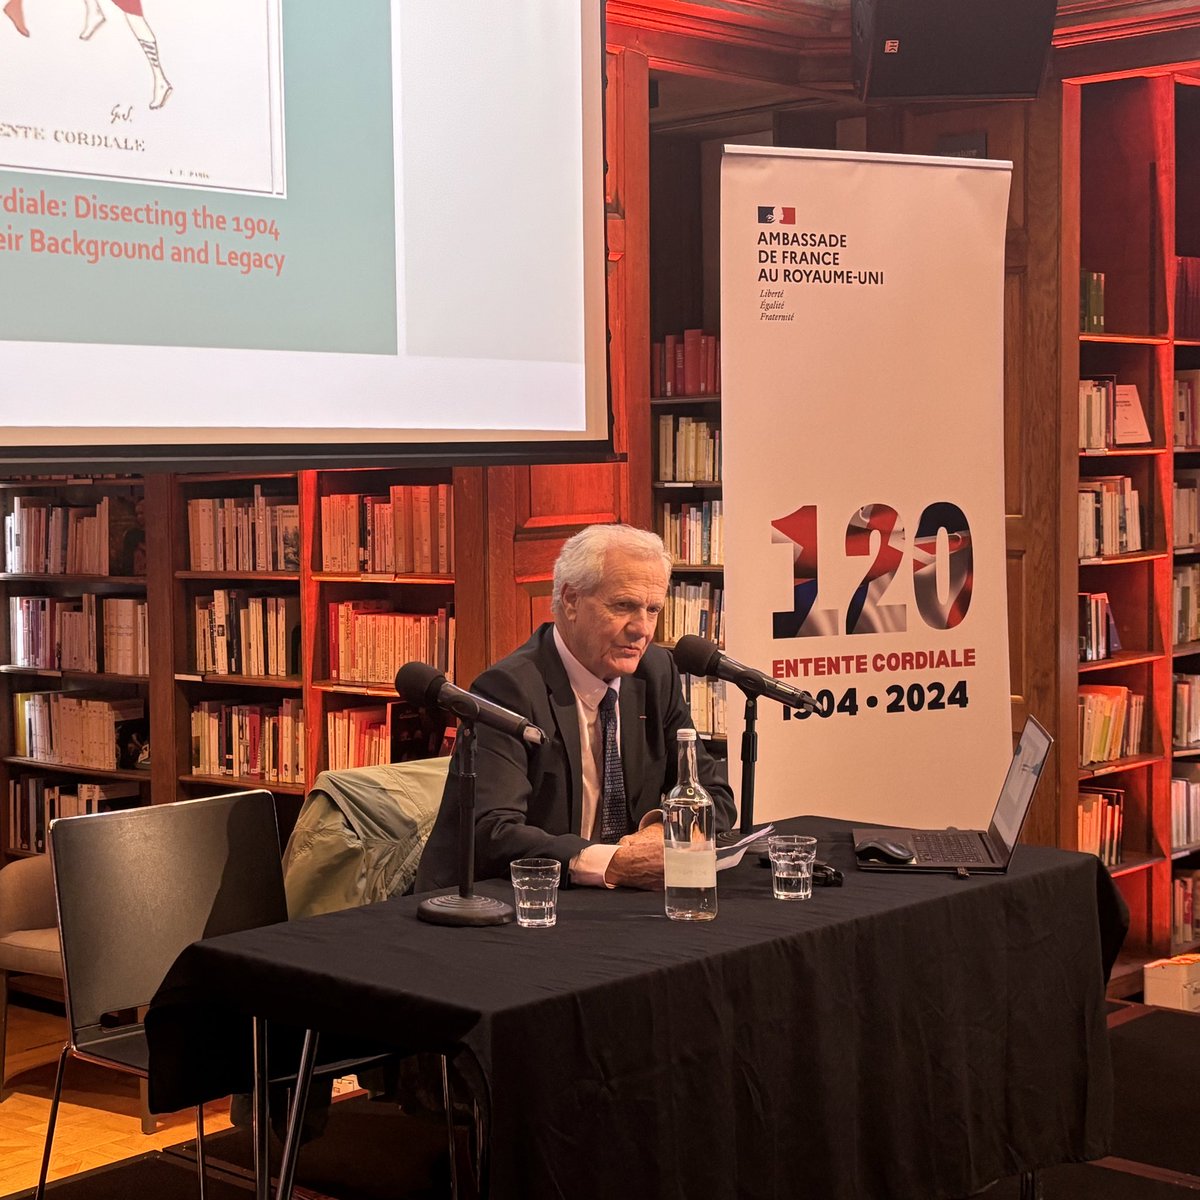 The #EntenteCordiale120 celebrations continue with Prof. Robert Frank dissecting the 1904 agreements in a conference introduced by @sebastienbidaud, Deputy Head of Mission @FranceintheUK @AmbascienceUK @ifru_london